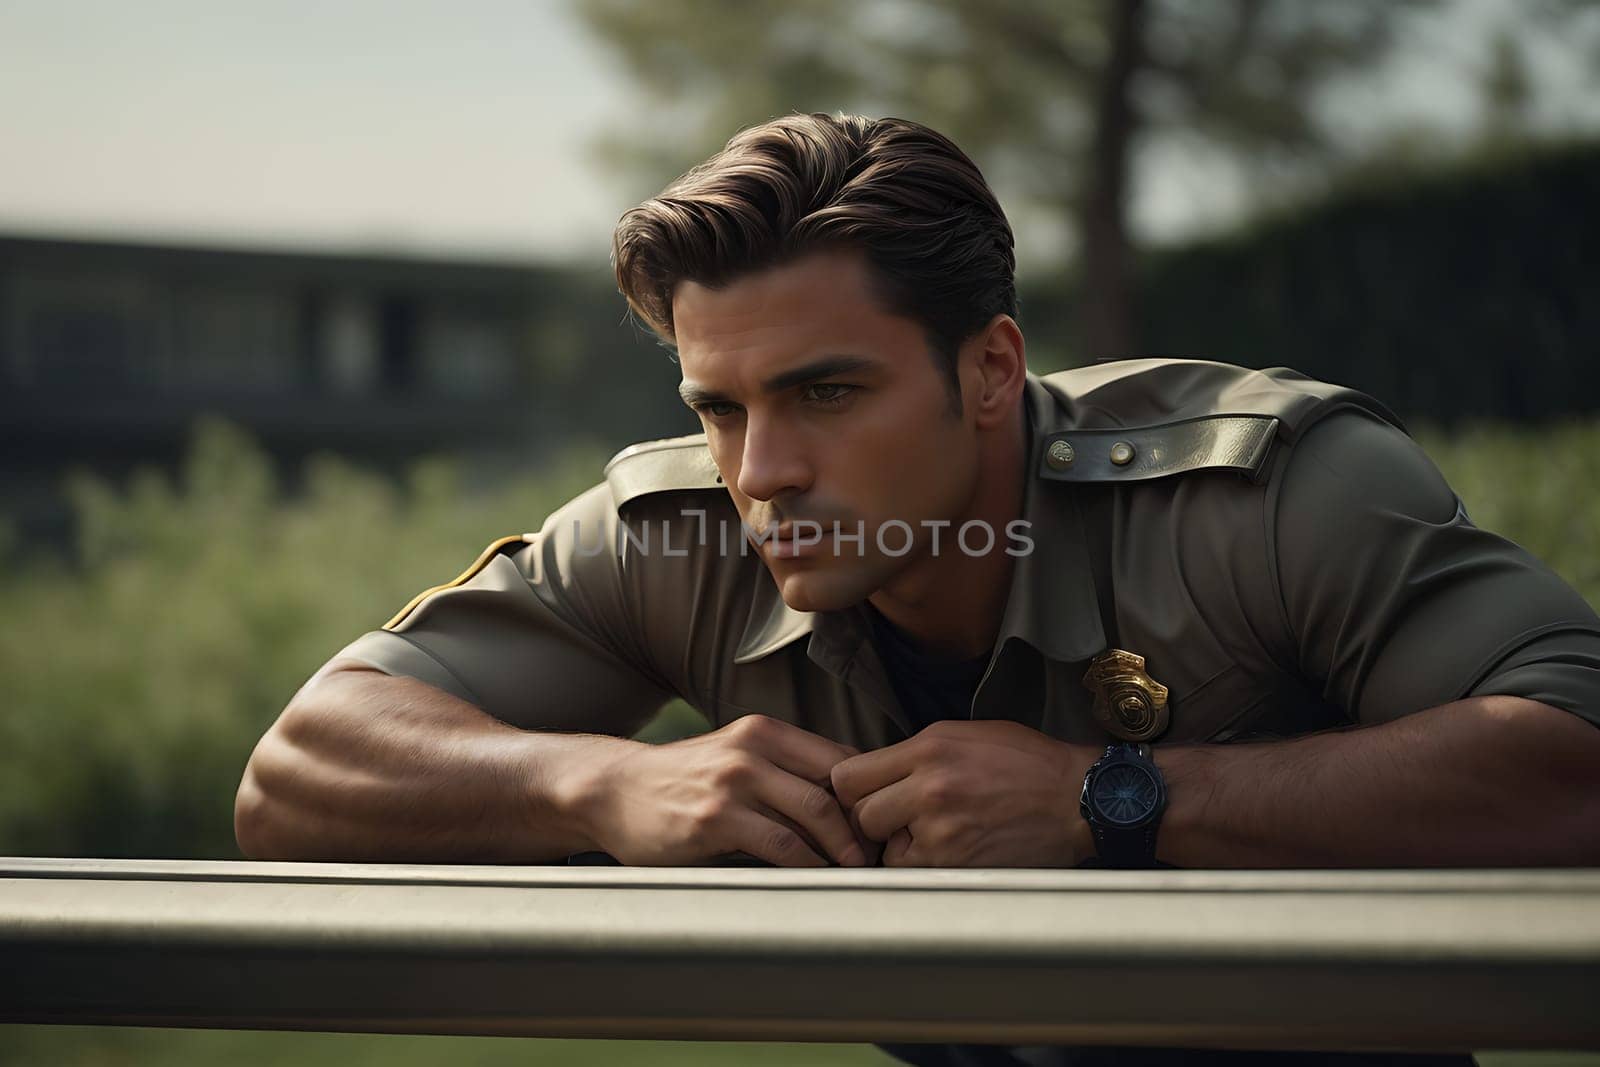 A man wearing a uniform leans casually on a rail, creating a relaxed yet strong visual impact.